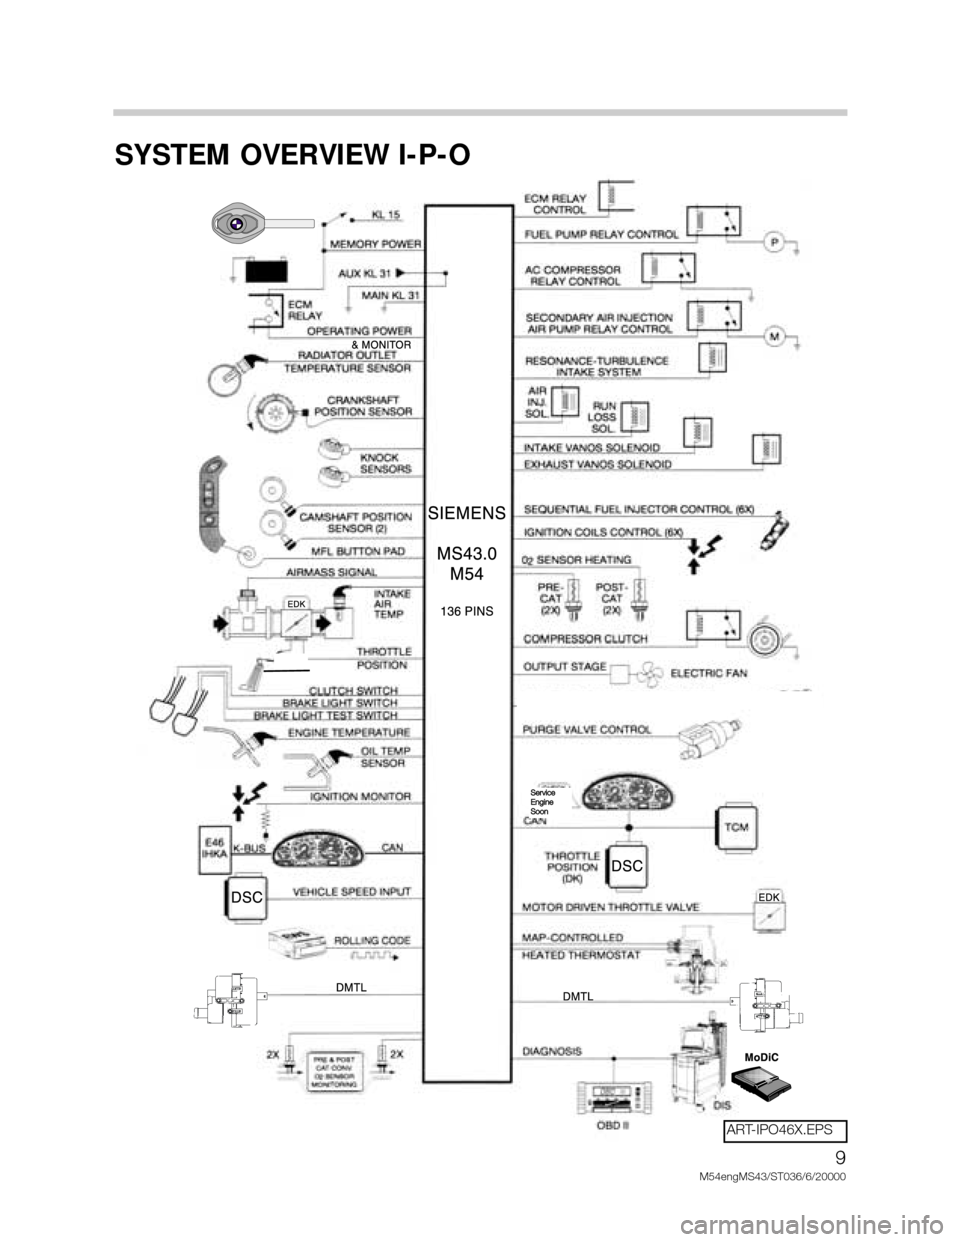 BMW X5 2003 E53 M54 Engine Workshop Manual 9
M54engMS43/ST036/6/20000
SYSTEM OVERVIEW I-P-O
Service 
Engine
Soon
ART-IPO46X.EPS 